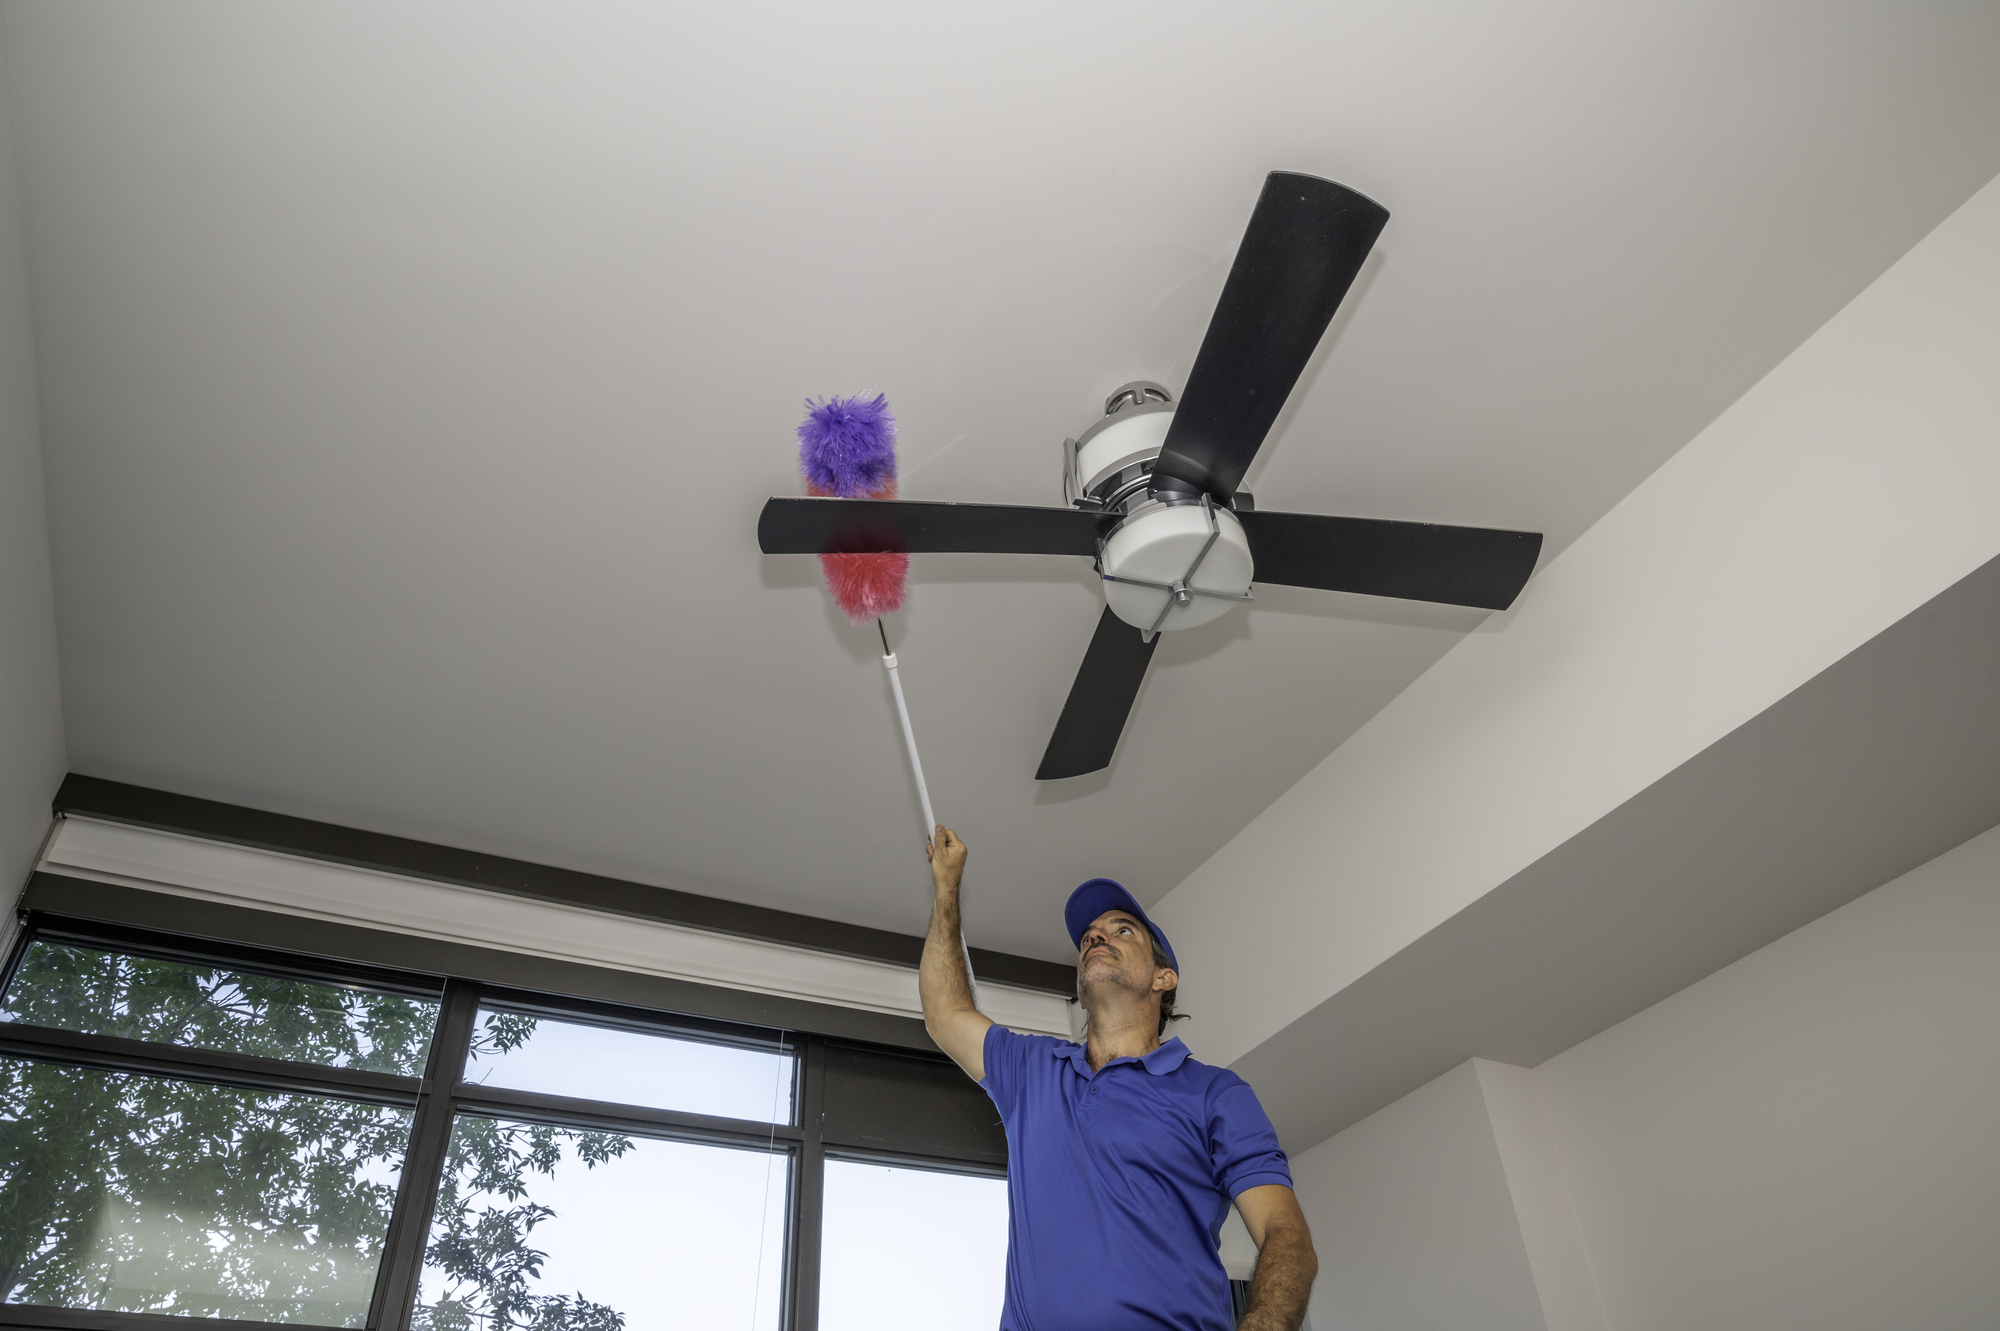 professional cleaner cleans dusty ceiling fan blades